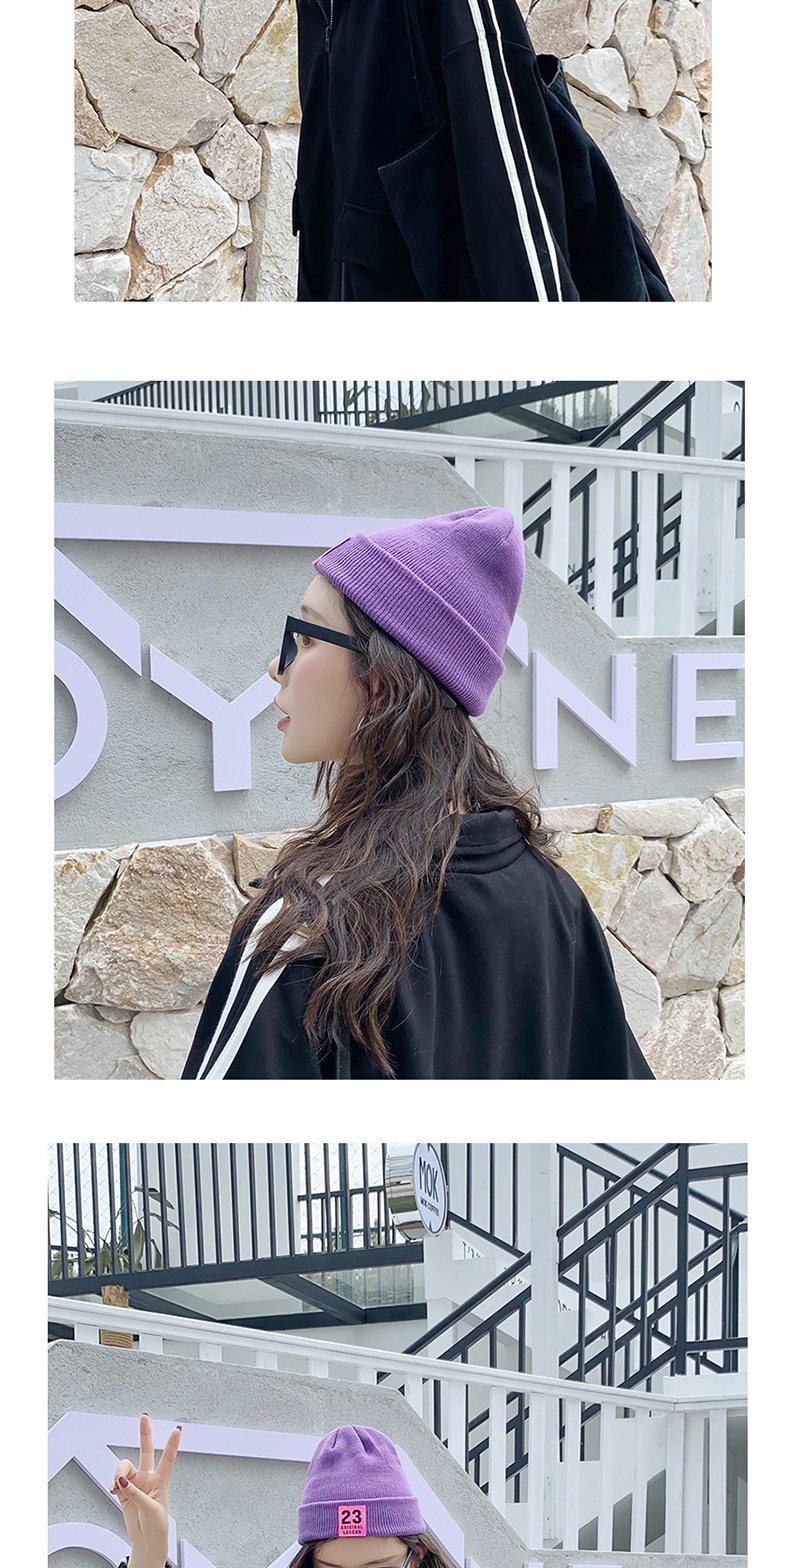 Fashion 23 Labeled Phosphor Pointed 23 Labeling Knitted Wool Cap,Knitting Wool Hats